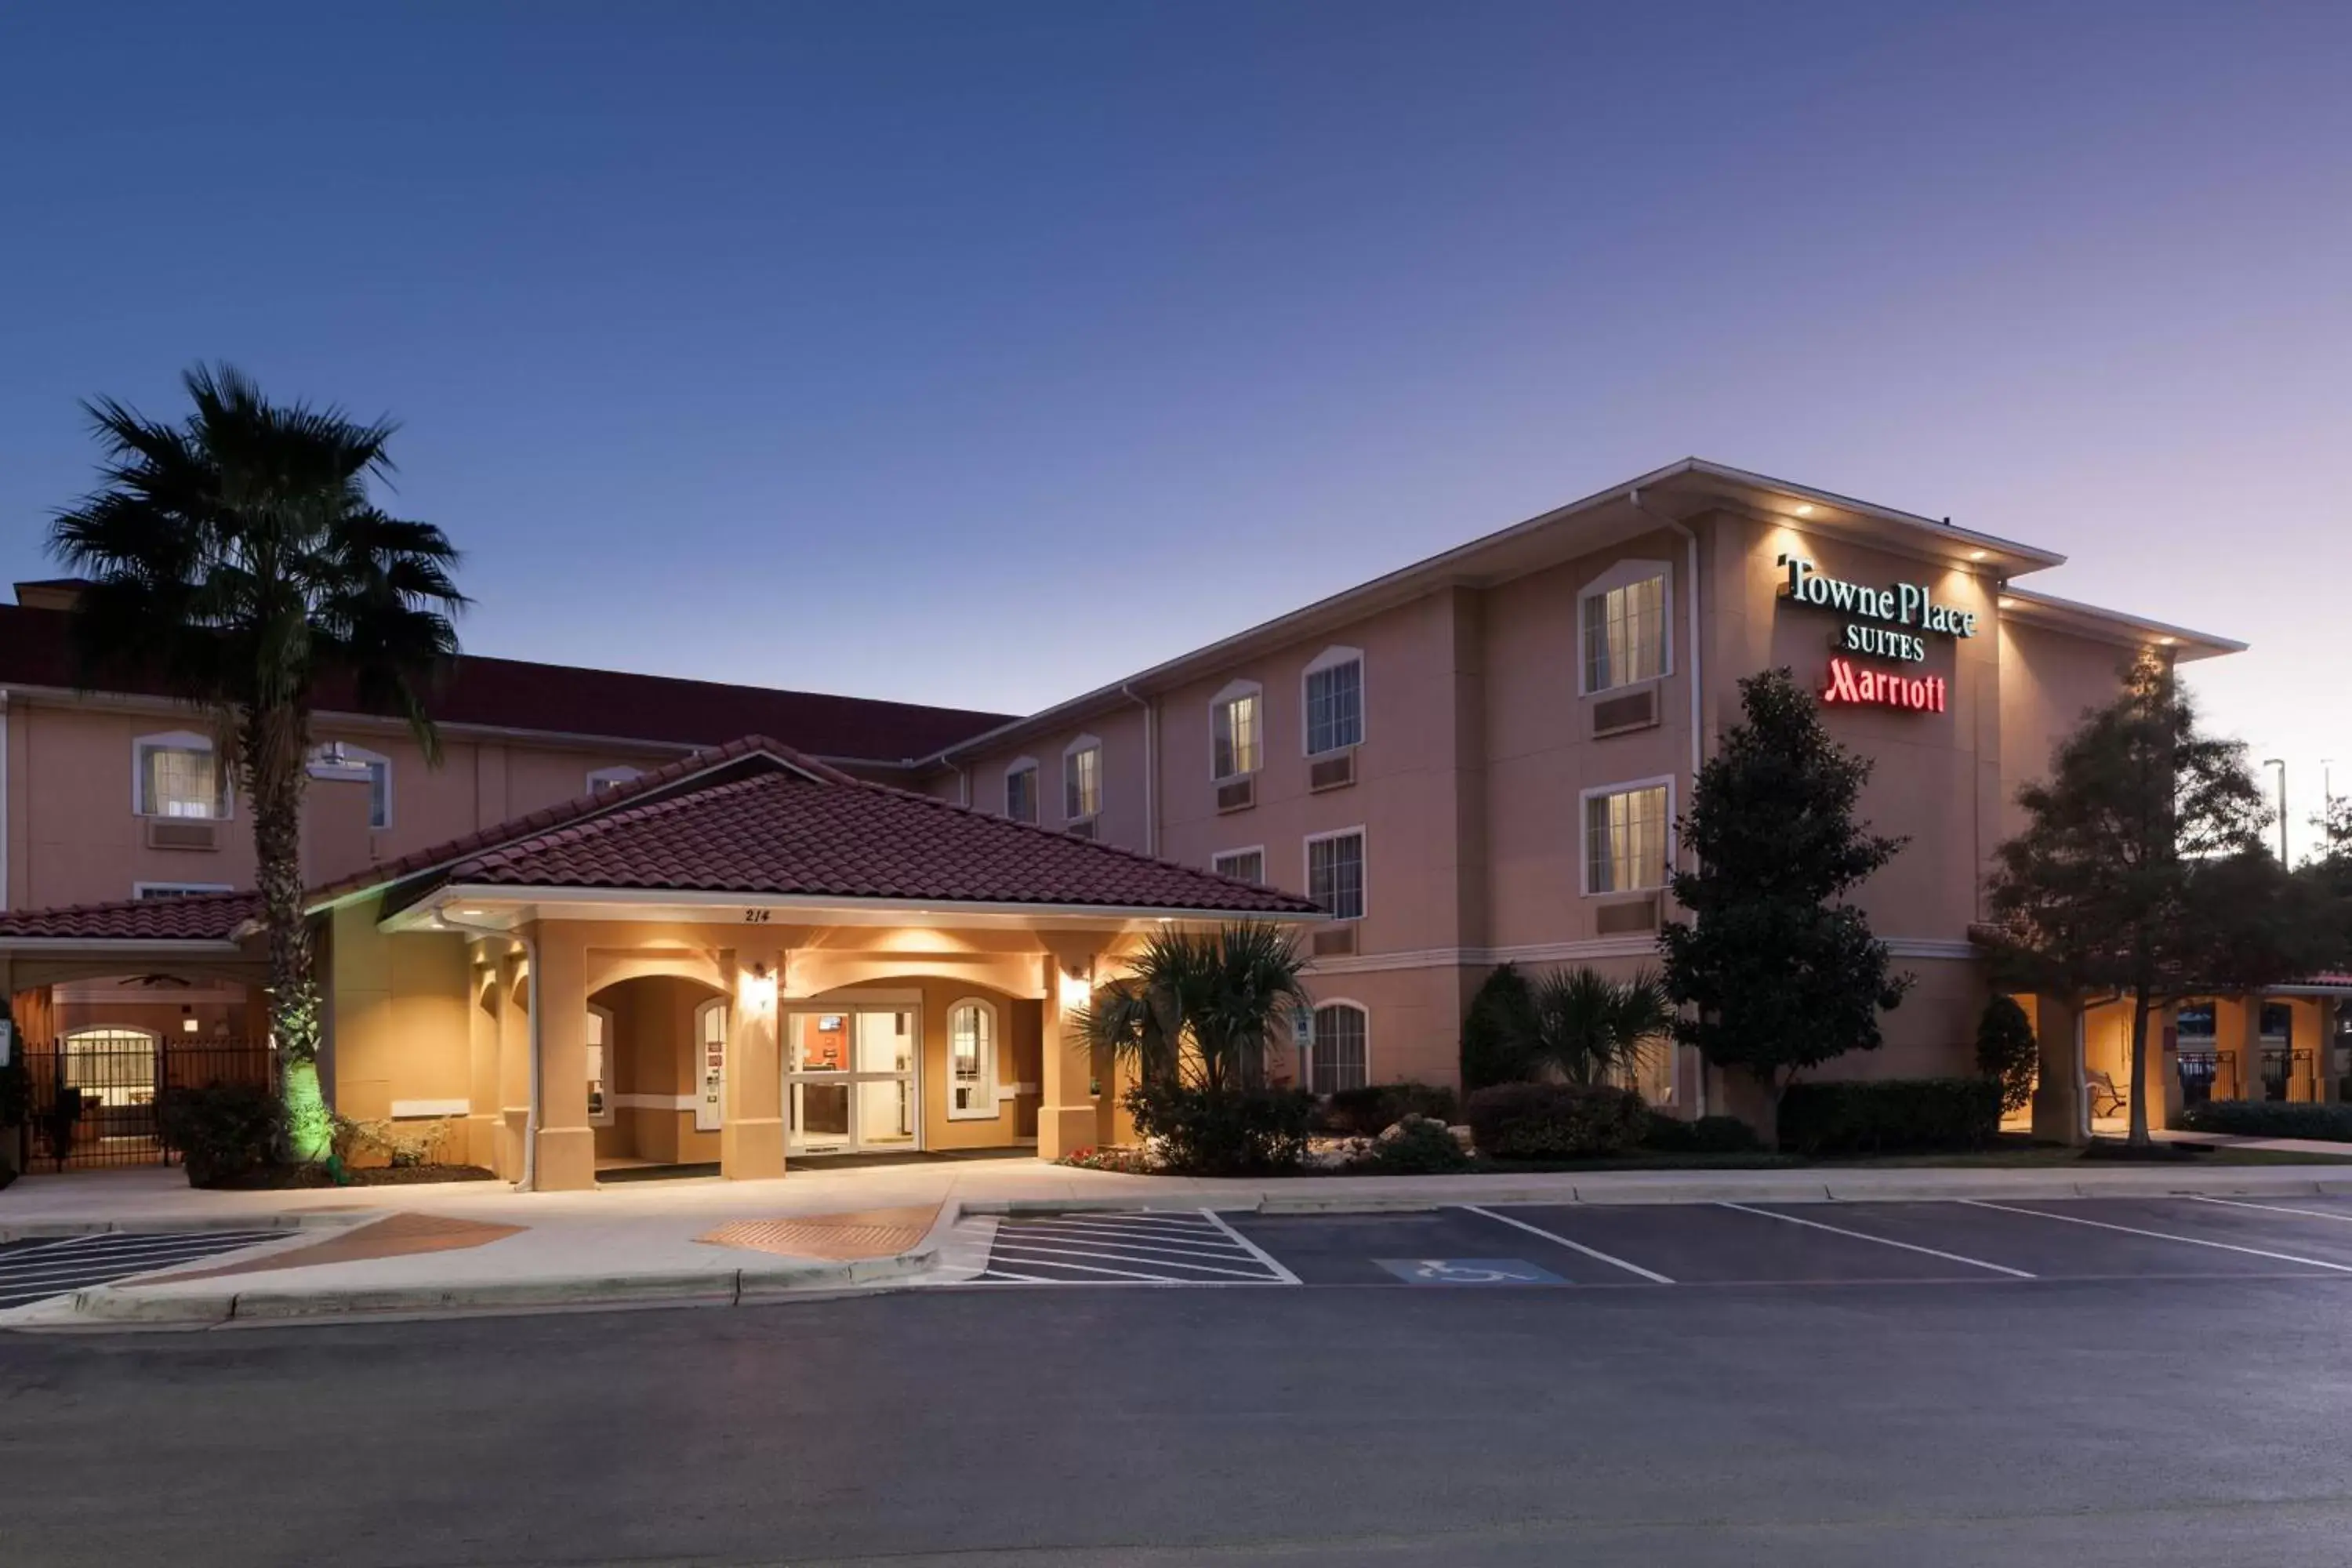 Property Building in TownePlace Suites by Marriott San Antonio Airport